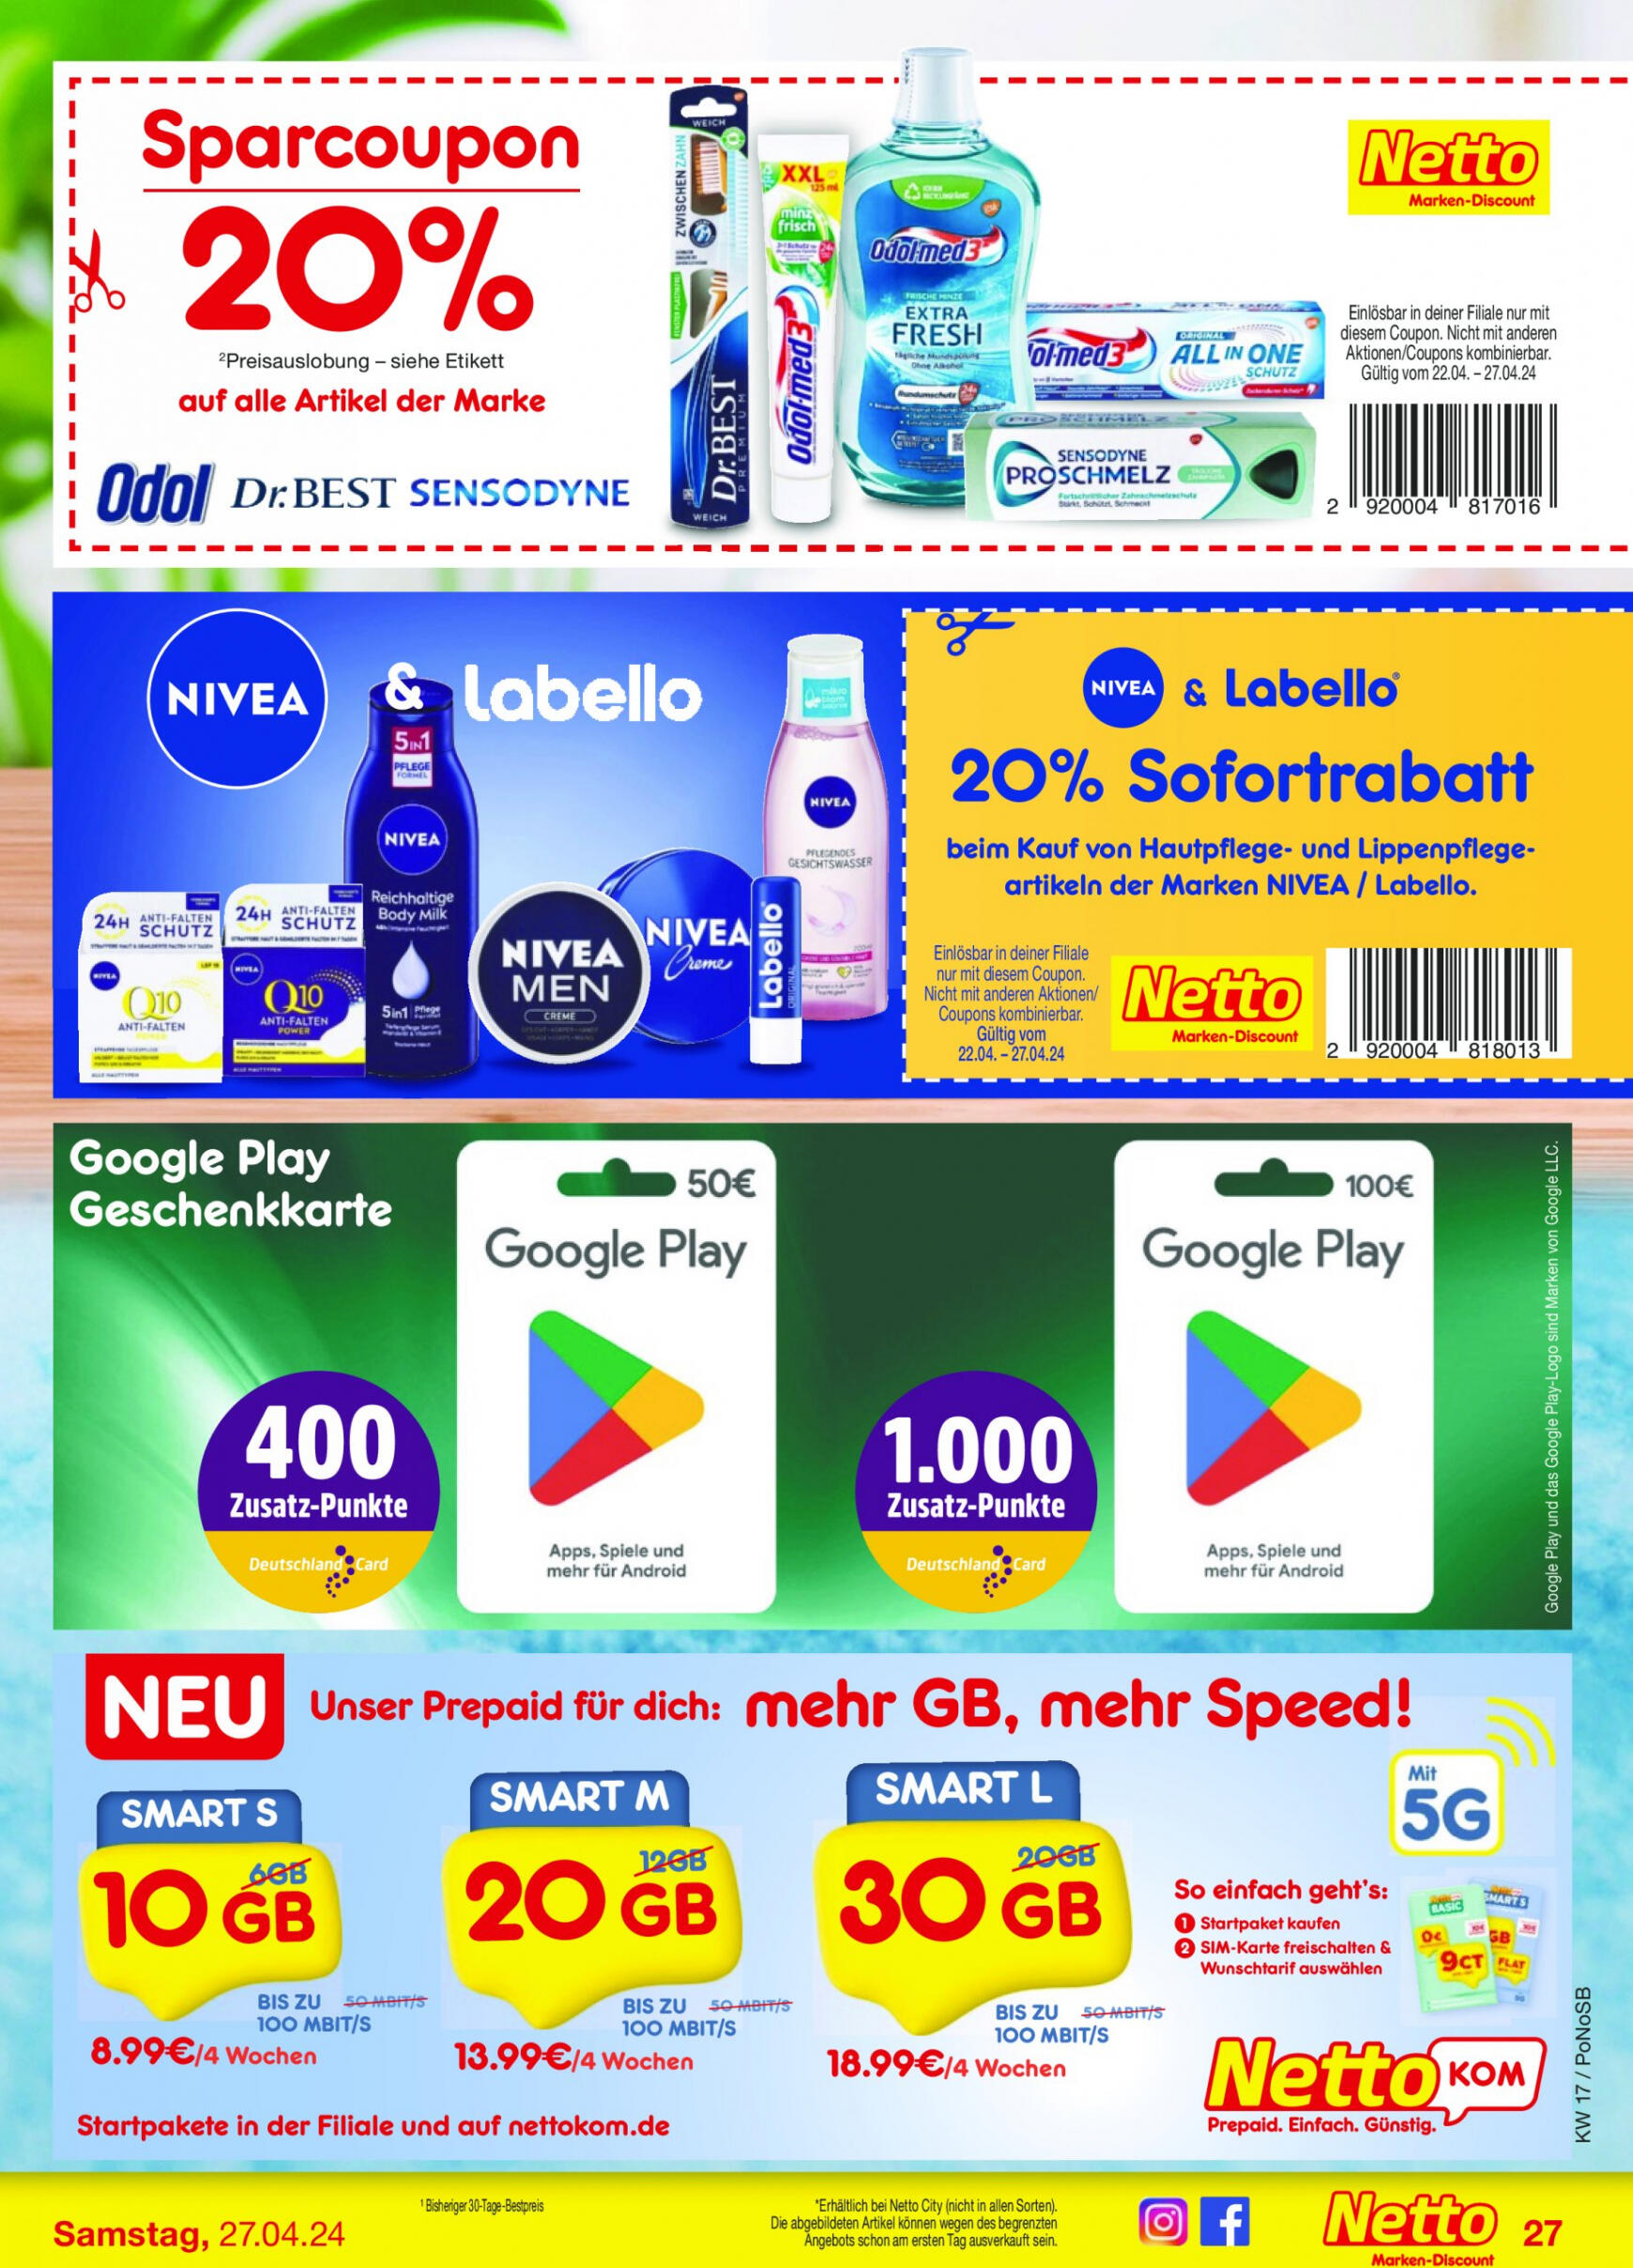 netto - Flyer Netto aktuell 22.04. - 27.04. - page: 29